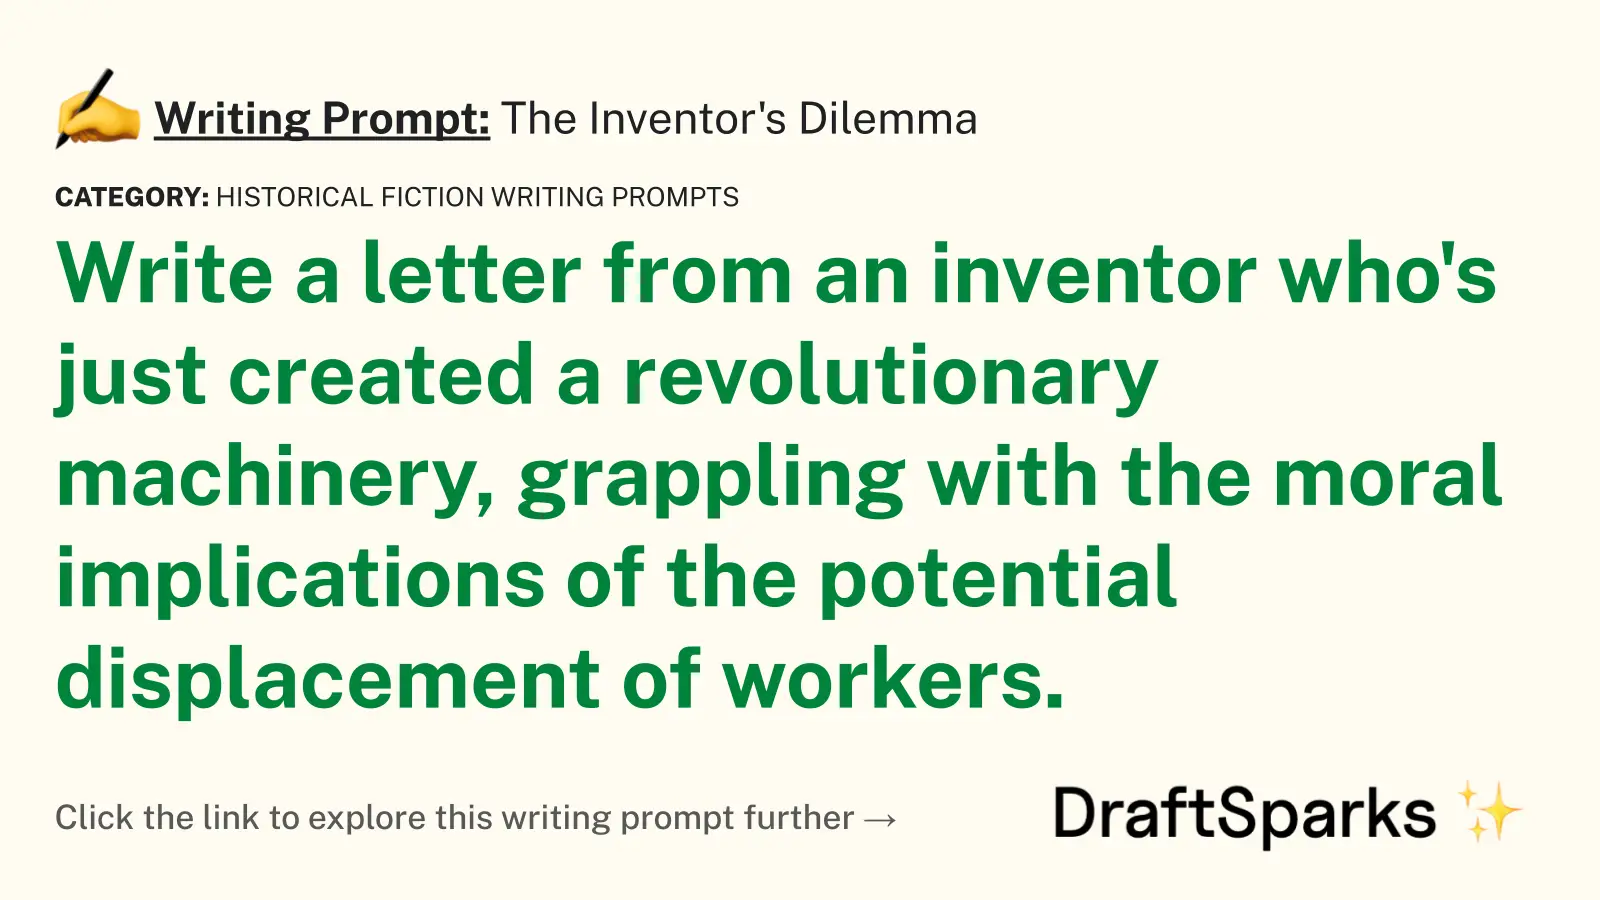 The Inventor’s Dilemma